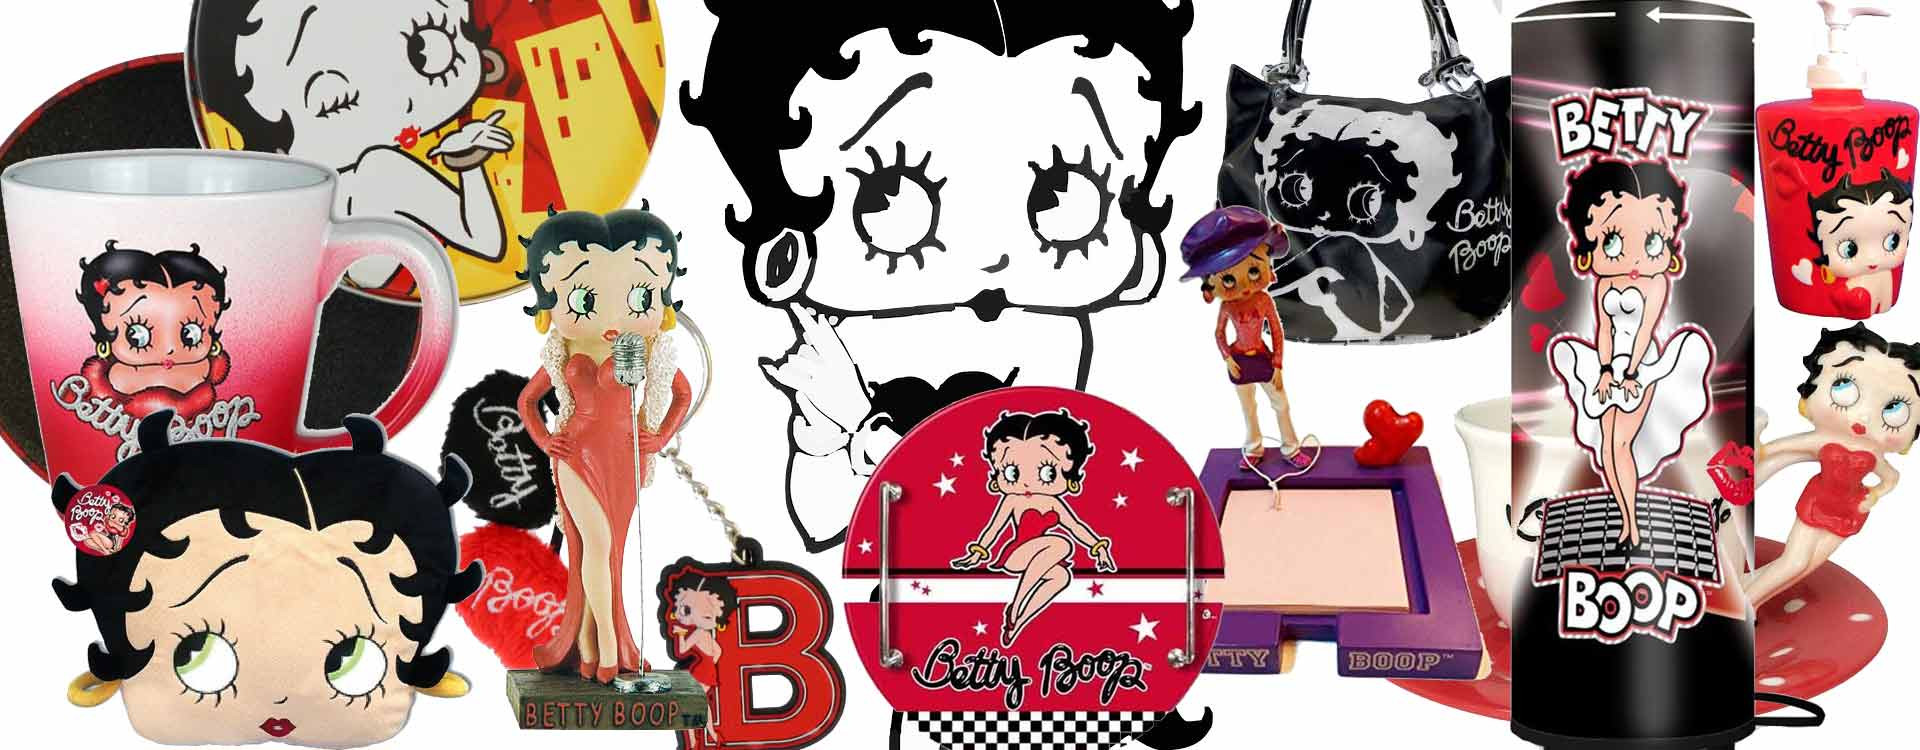 ana kozomara recommends Betty Boop Images